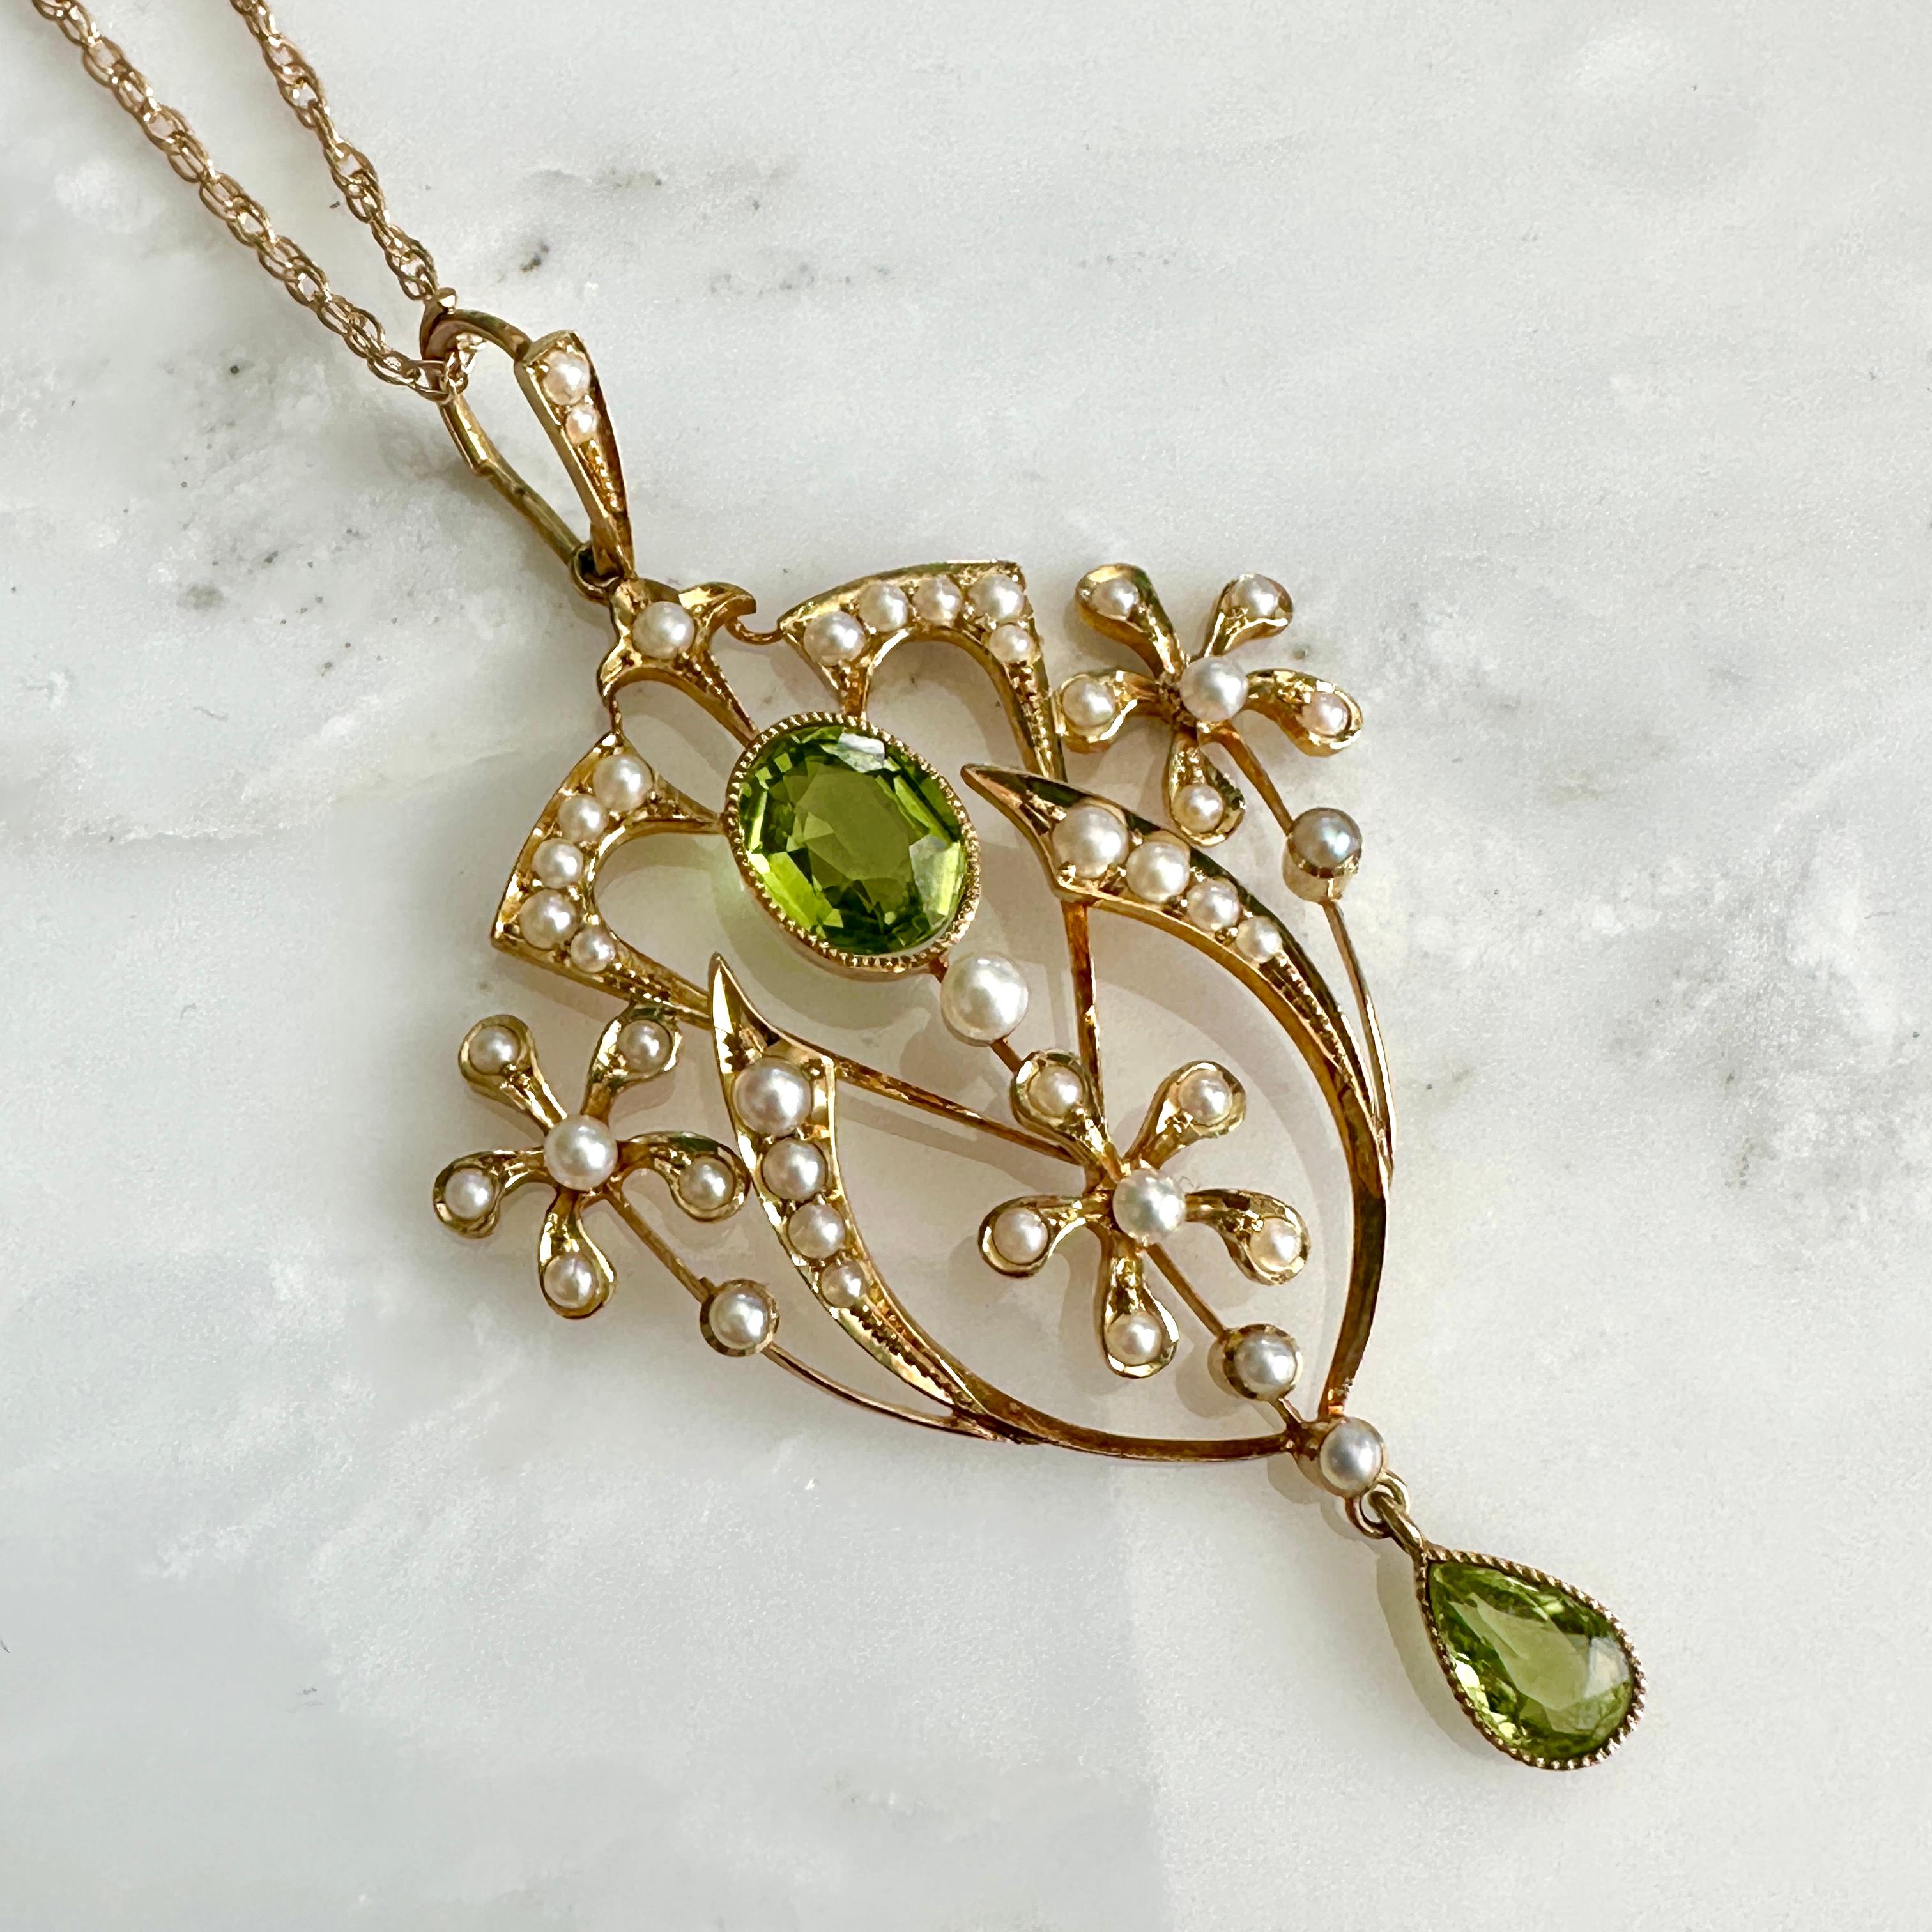 Details:
Edwardian Belle Époque Peridot and seed pearl pendant necklace set in 15K yellow gold. This lovely pendant is delicate, and bold at the same time. The two peridots are a vibrant bright apple green color, the larger center one measures 8mm x